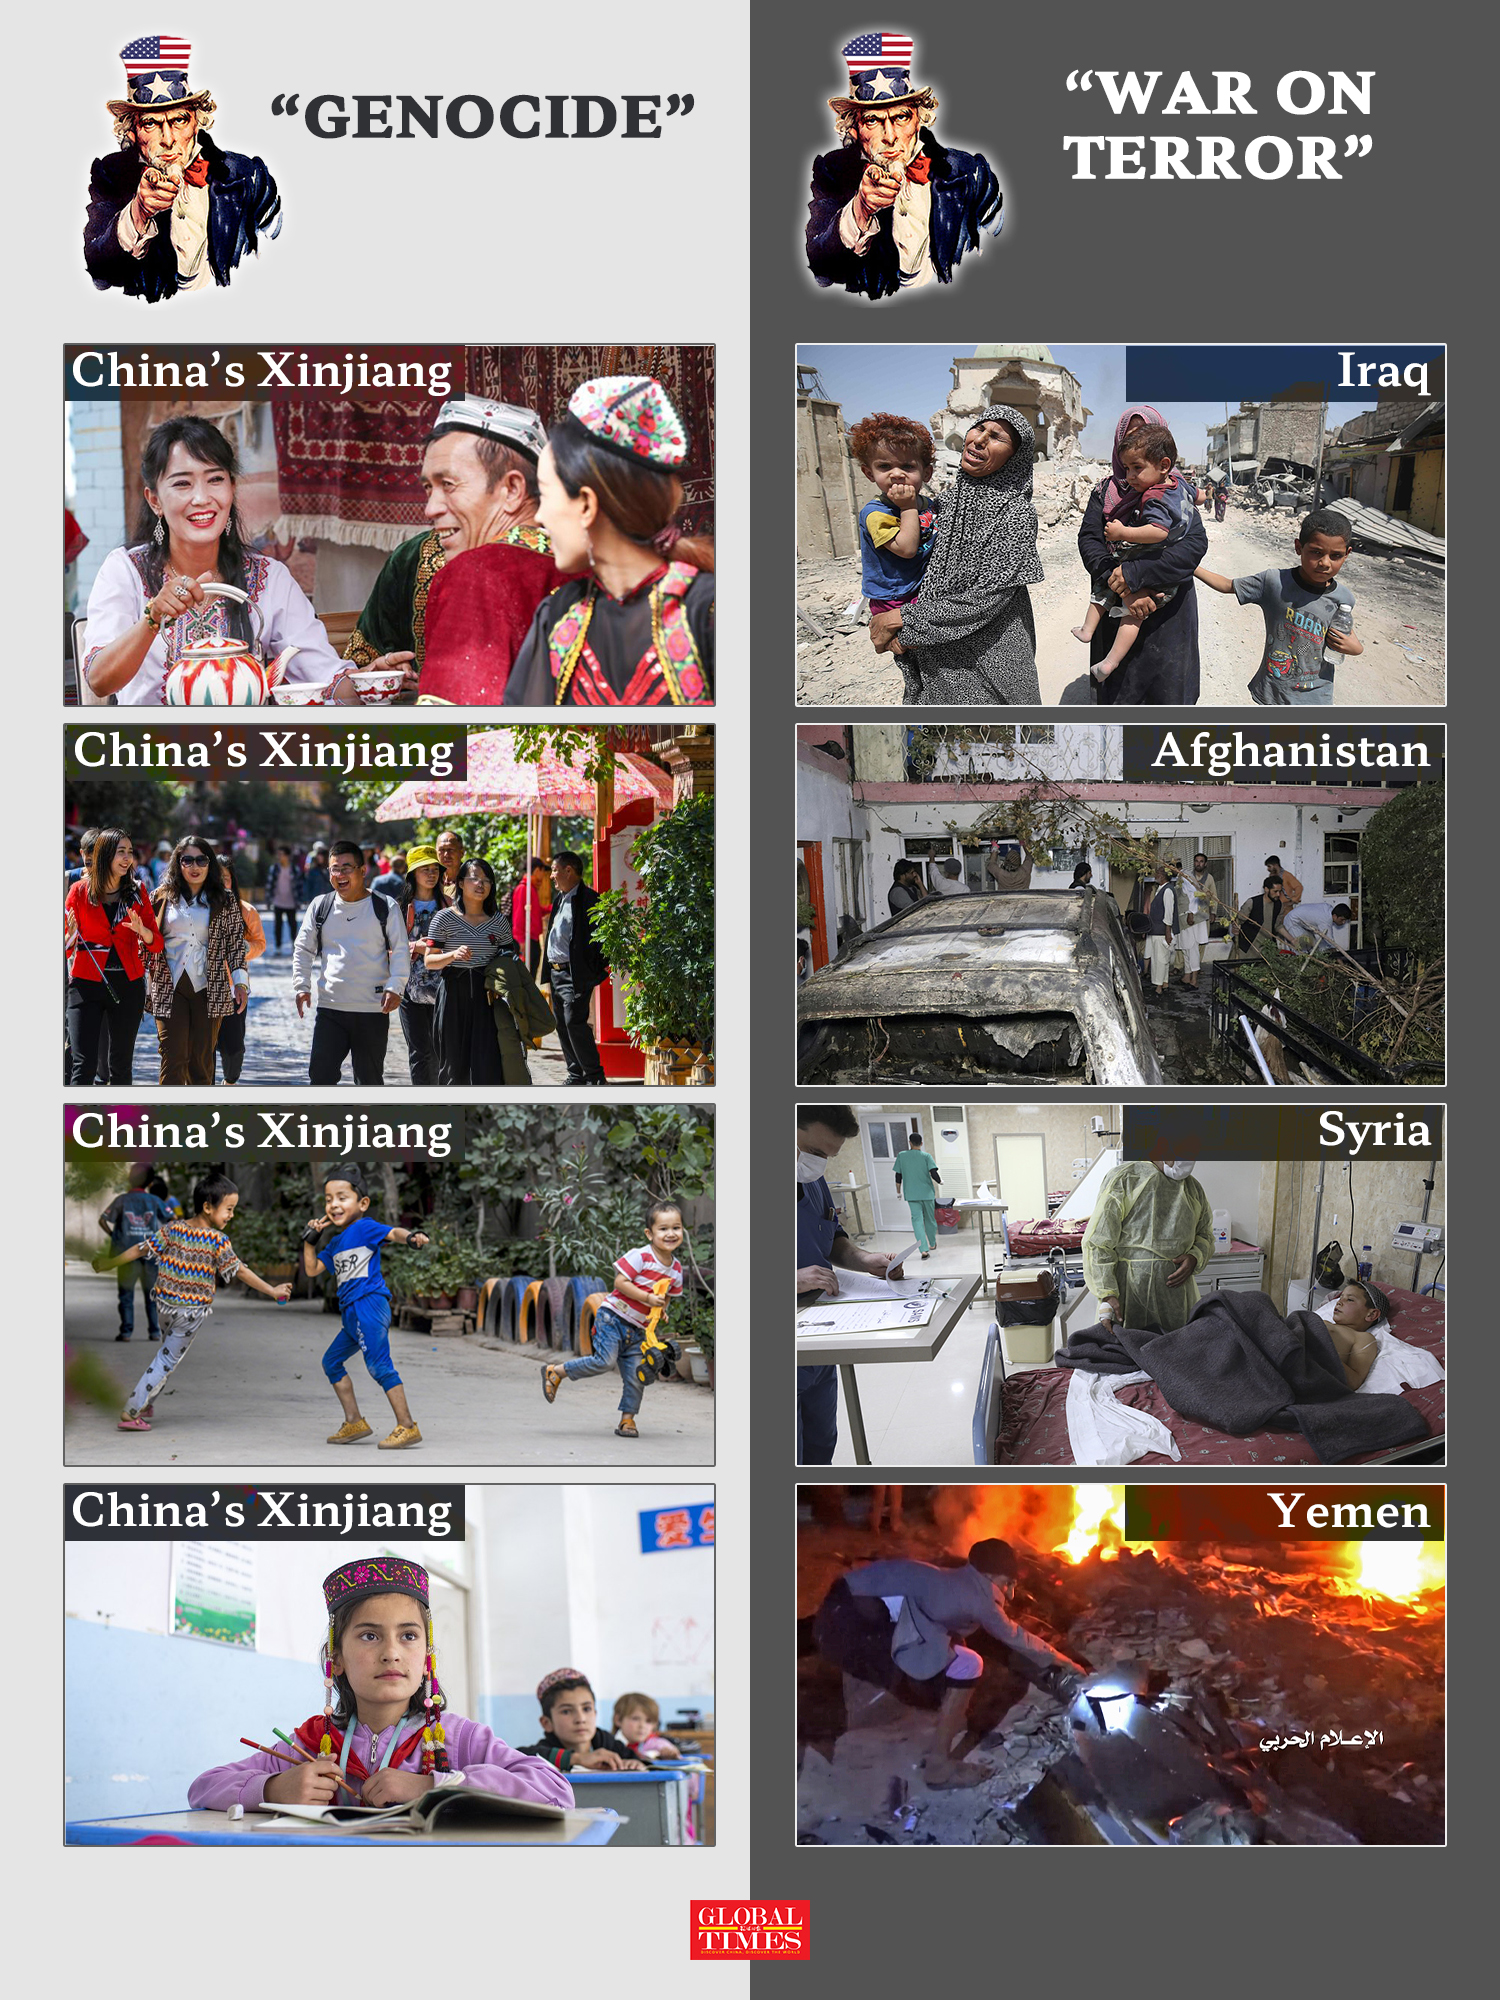 When China builds Xinjiang, the US calls it “genocide.” When the US bombs Iraq, Syria, Afghanistan and Yemen, it calls it “war on terror.” Graphic: GT